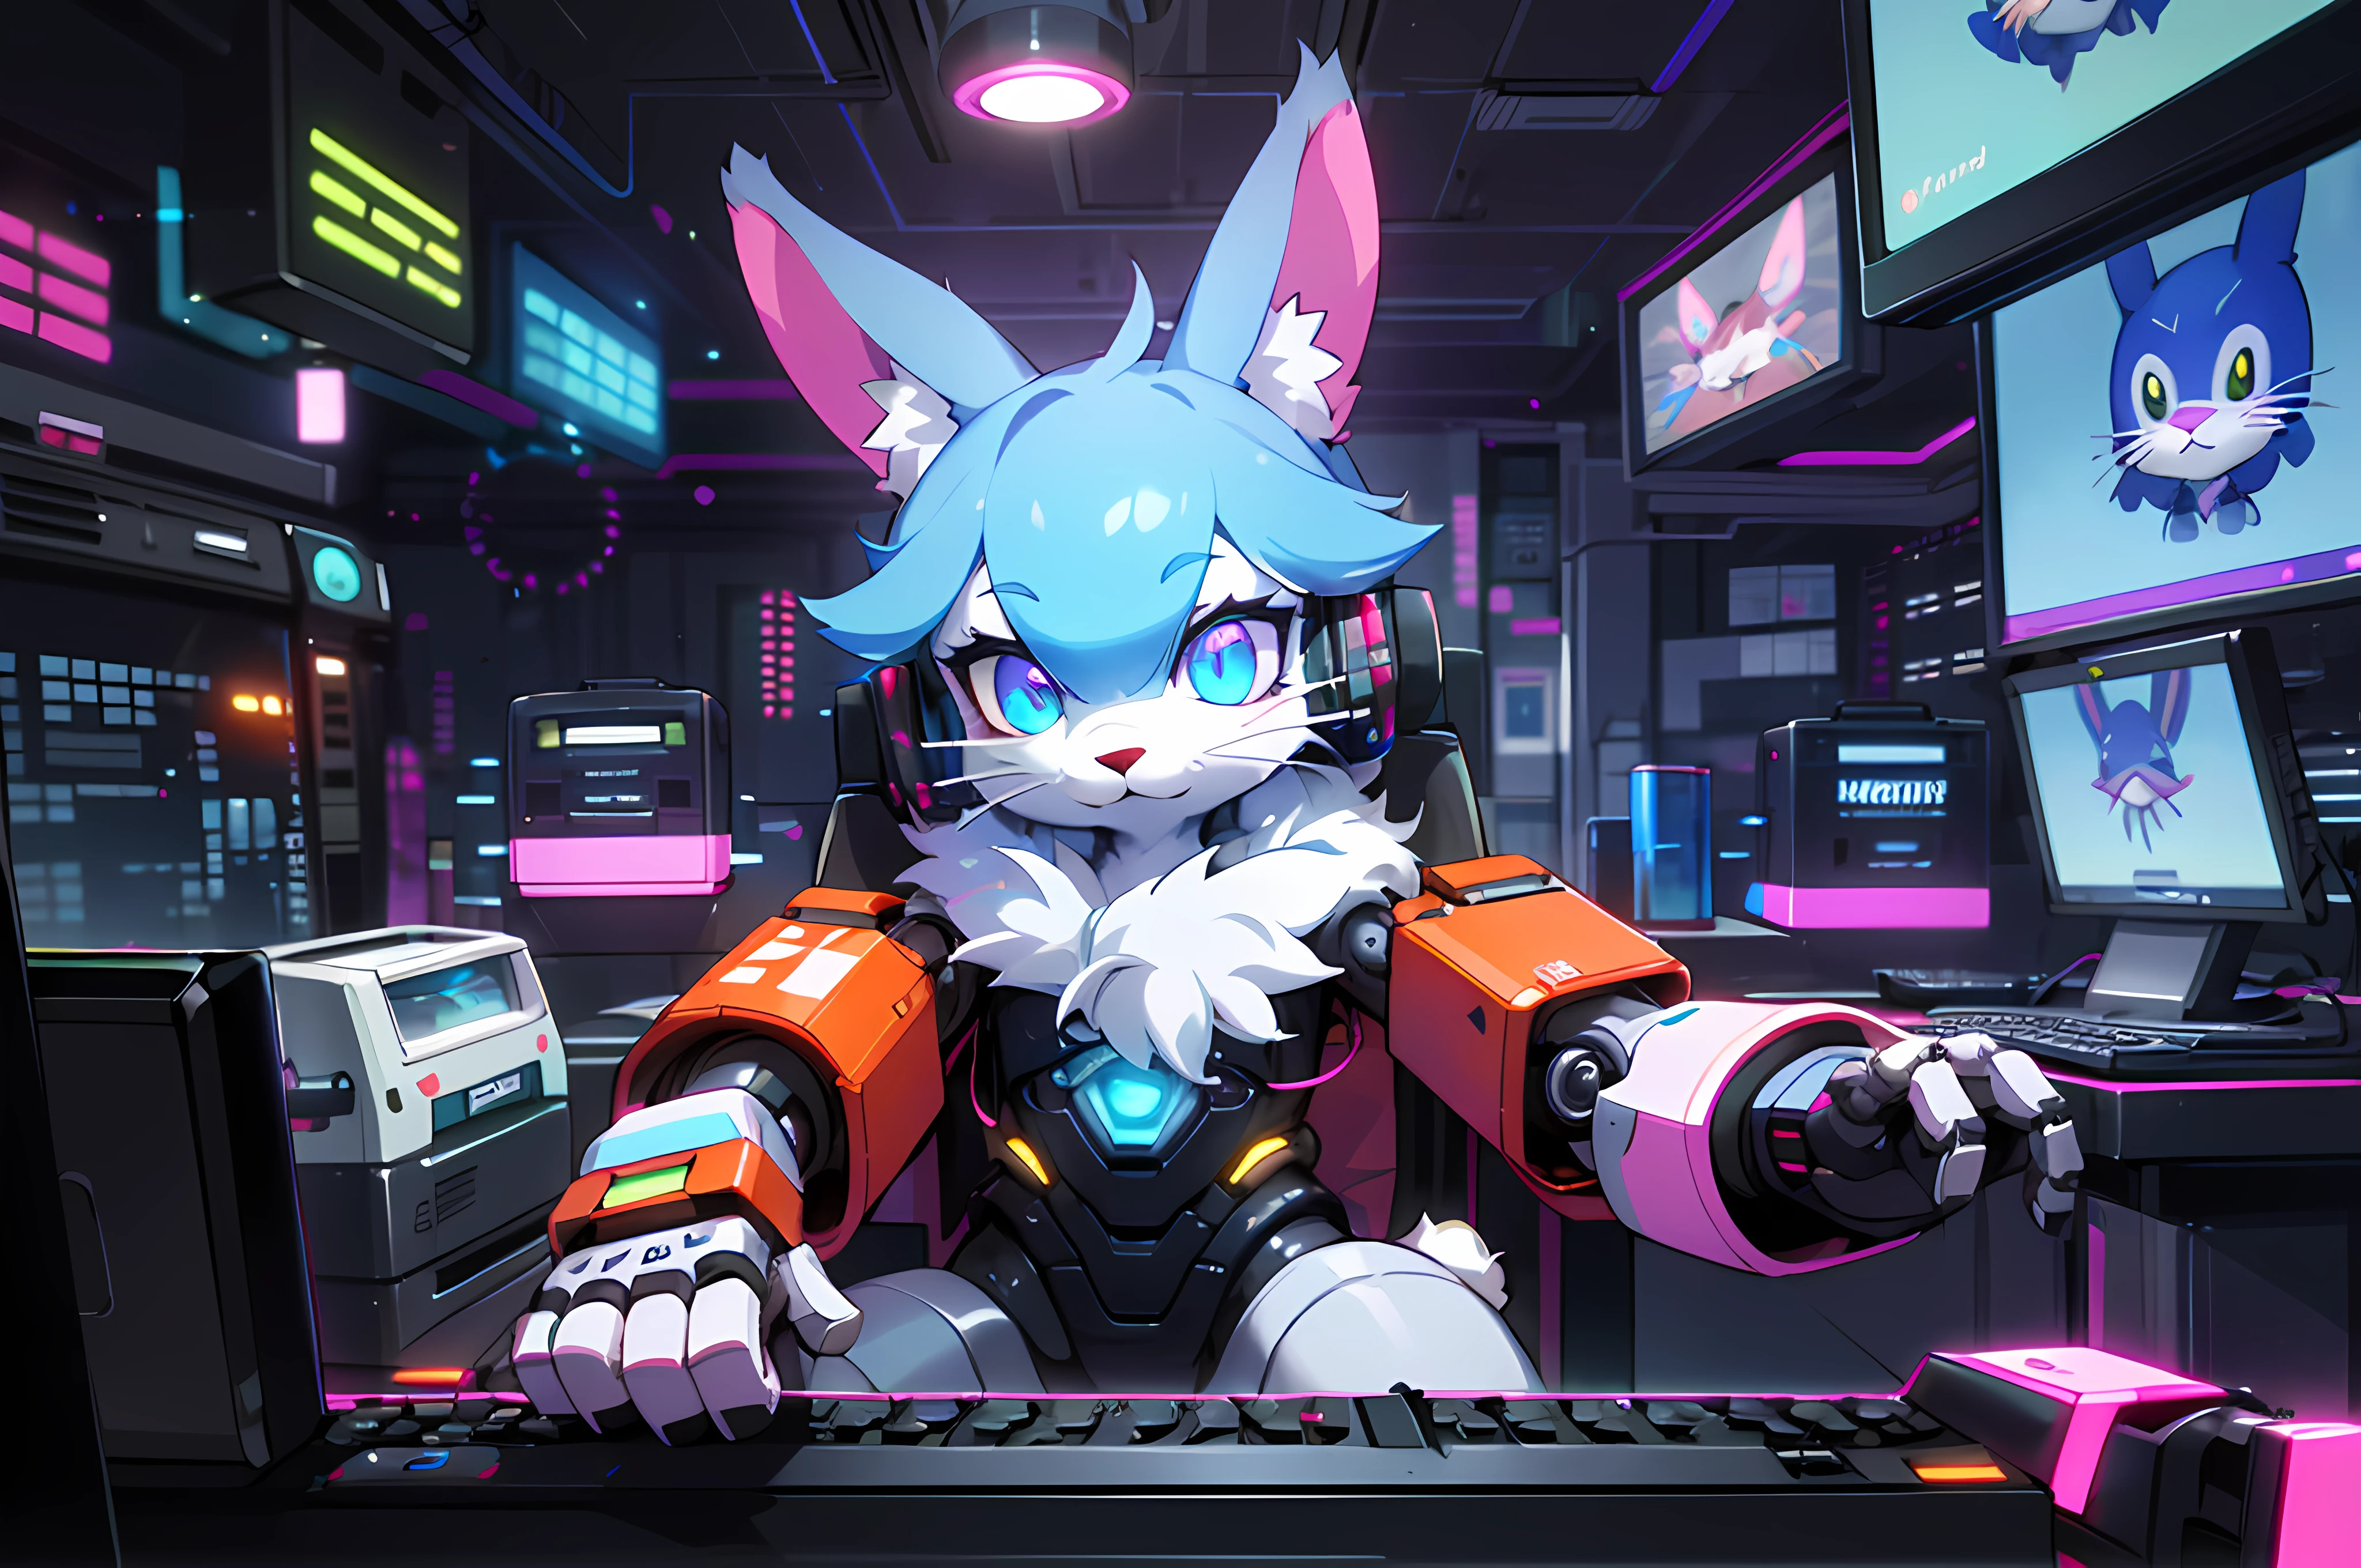 (blame! style abandoned tech landscape), (Zen, Amy Sol style), (((beats to relax/study to))), (((Lofi anthro kemono blue-furred rabbit girl in power armor sitting in metal chair behind computer terminal, behind giant glass terminal screen, beats to relax/study to))), (((blue kemono beastars furry rabbit anime hacker with small soft furry paws))), (((suspended glass cyberpunk computer terminals with robot rabbit in background))), ((glowing cyberdeck screens)), (underground, dark, foggy, perilous, abandoned dystopian apartment bedroom, deep windows), (abstract anthro rabbit figure wearing bunny ears), cover art with light abstraction, abstract, simple vector art, contemporary Cybernetic art, color gradients, soft color palettes, layered forms, whimsical animation, style Ethereal abstract, 4K, --v6